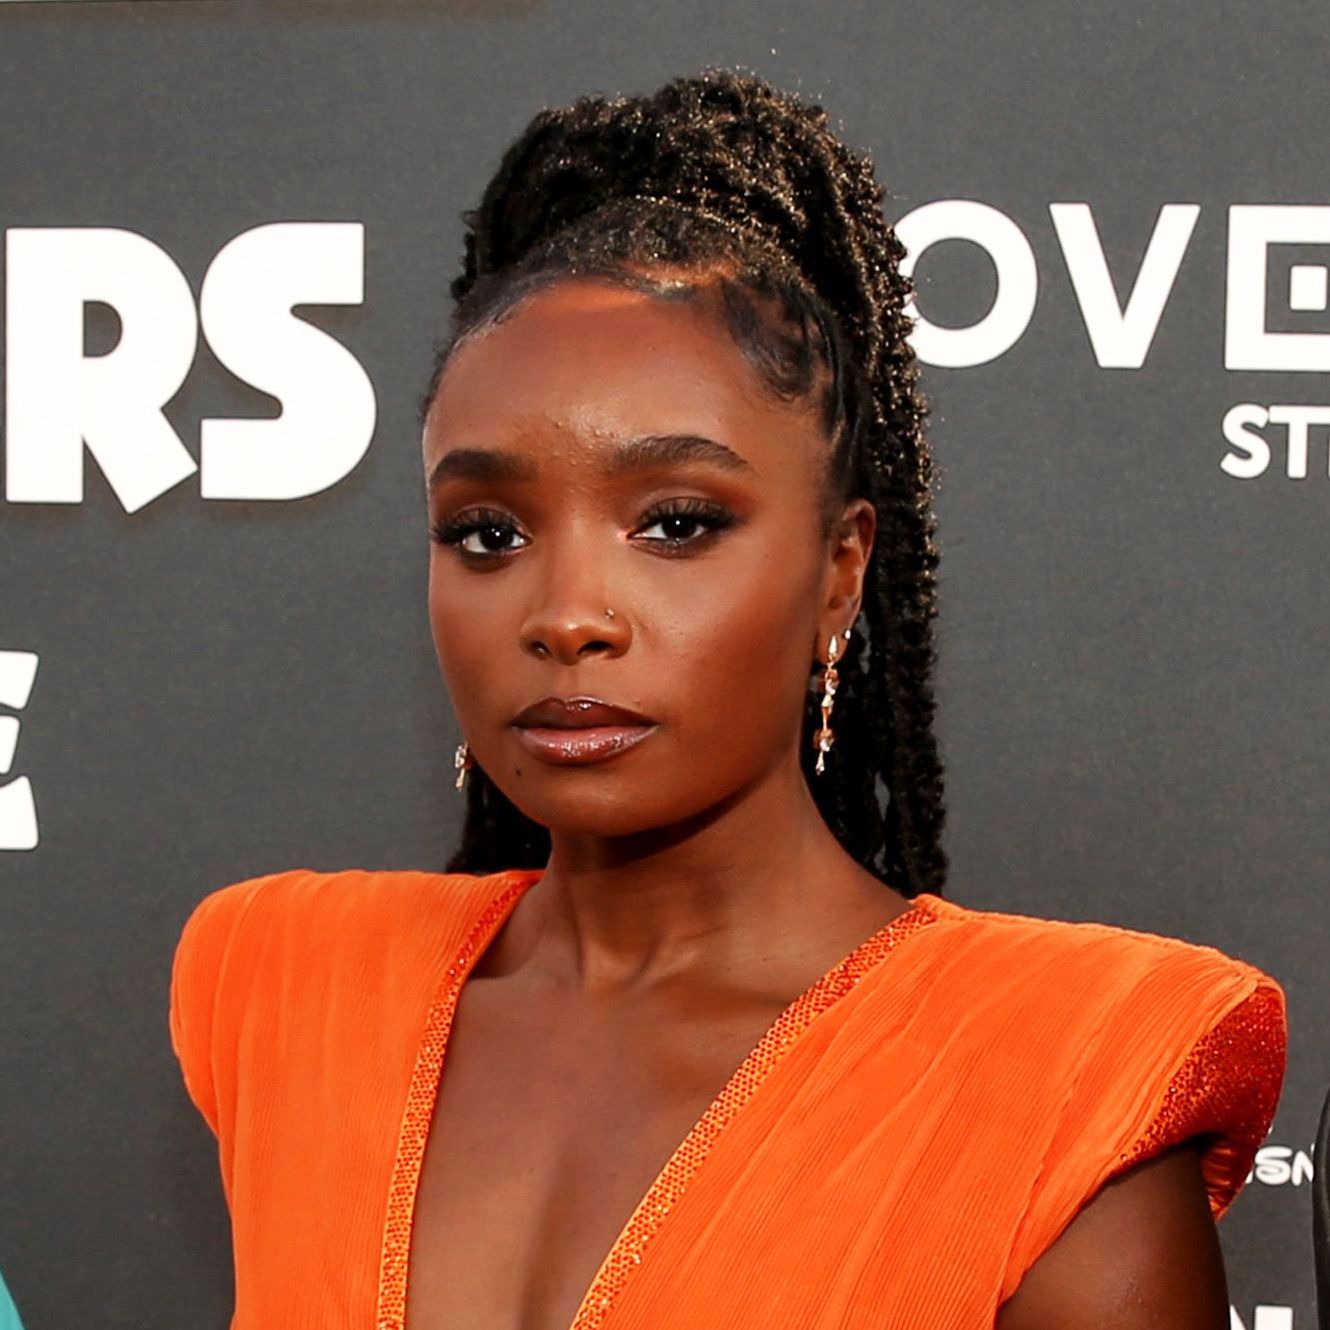 Kiki Layne 'Cut' From 'Most' of 'Don't Worry Darling